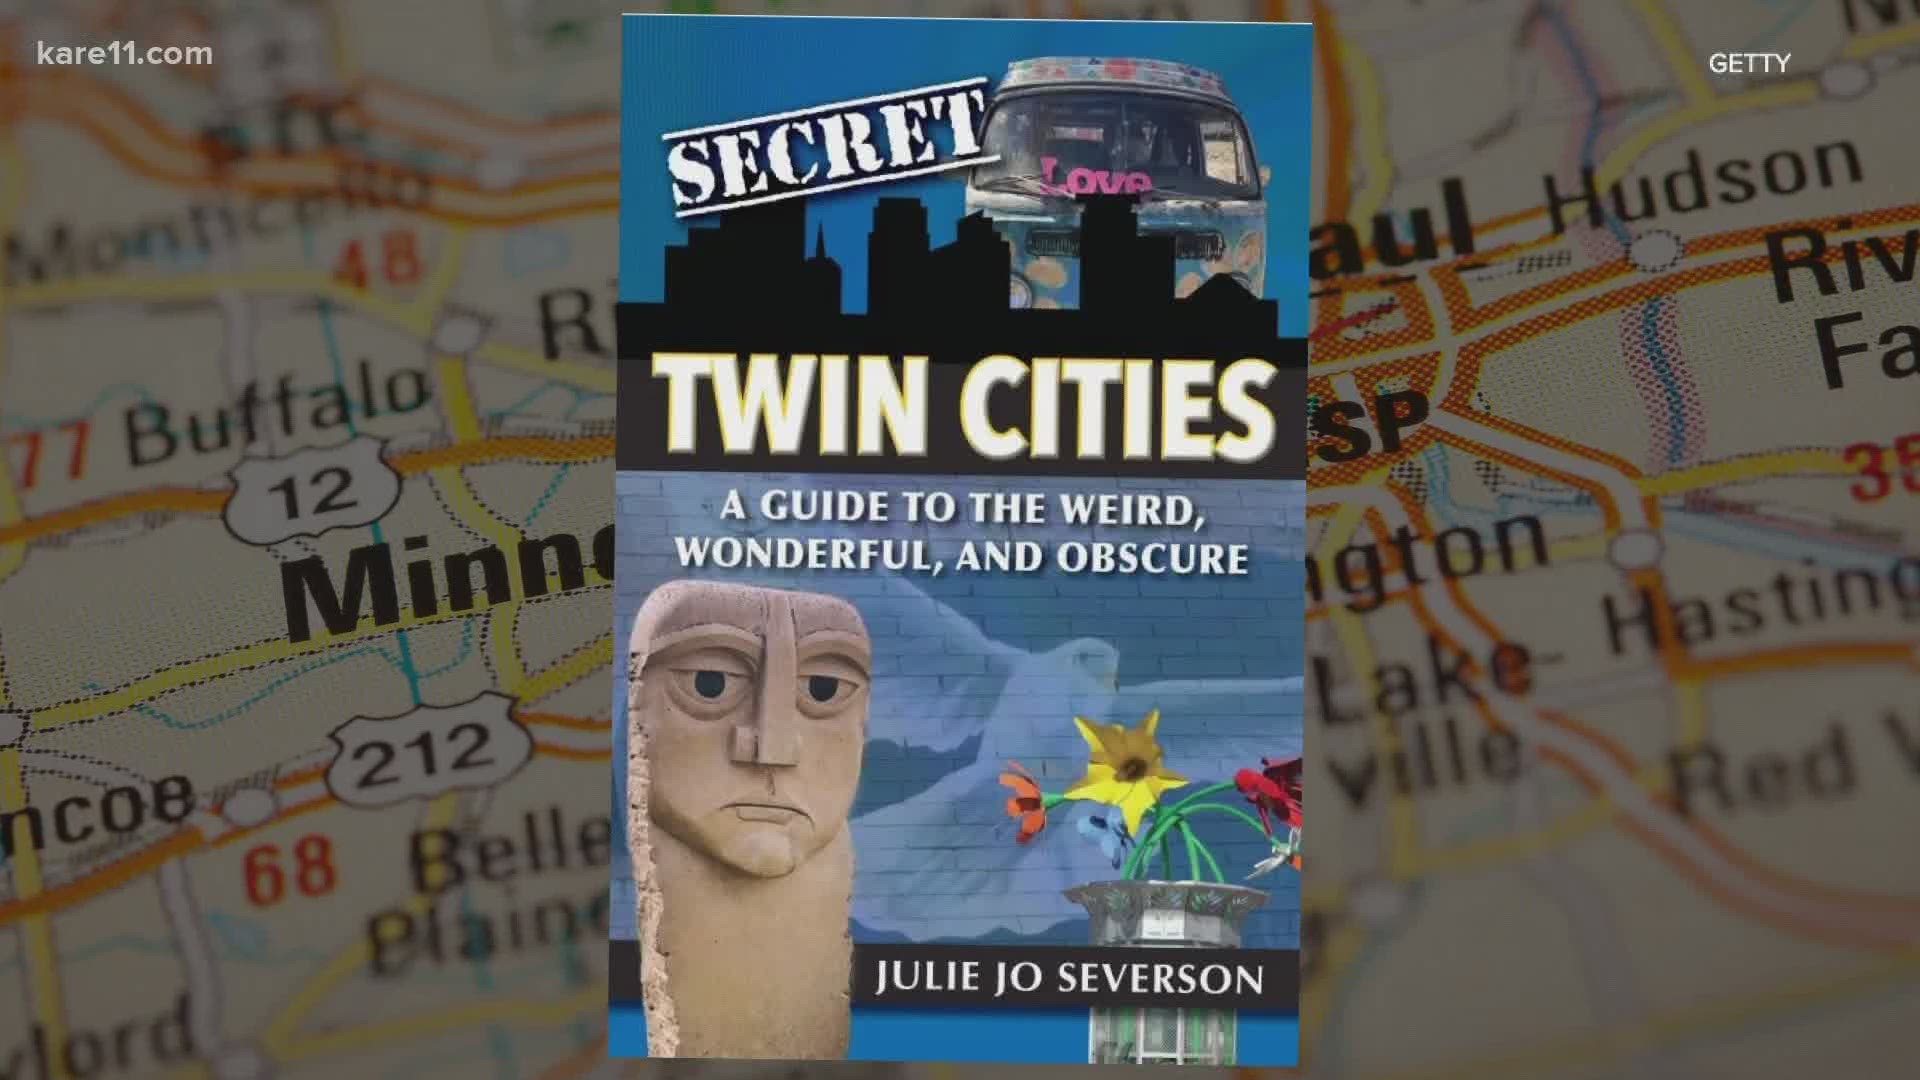 Plymouth author Julie Jo Severson talks about her Weird, Wonderful and Obscure discoveries